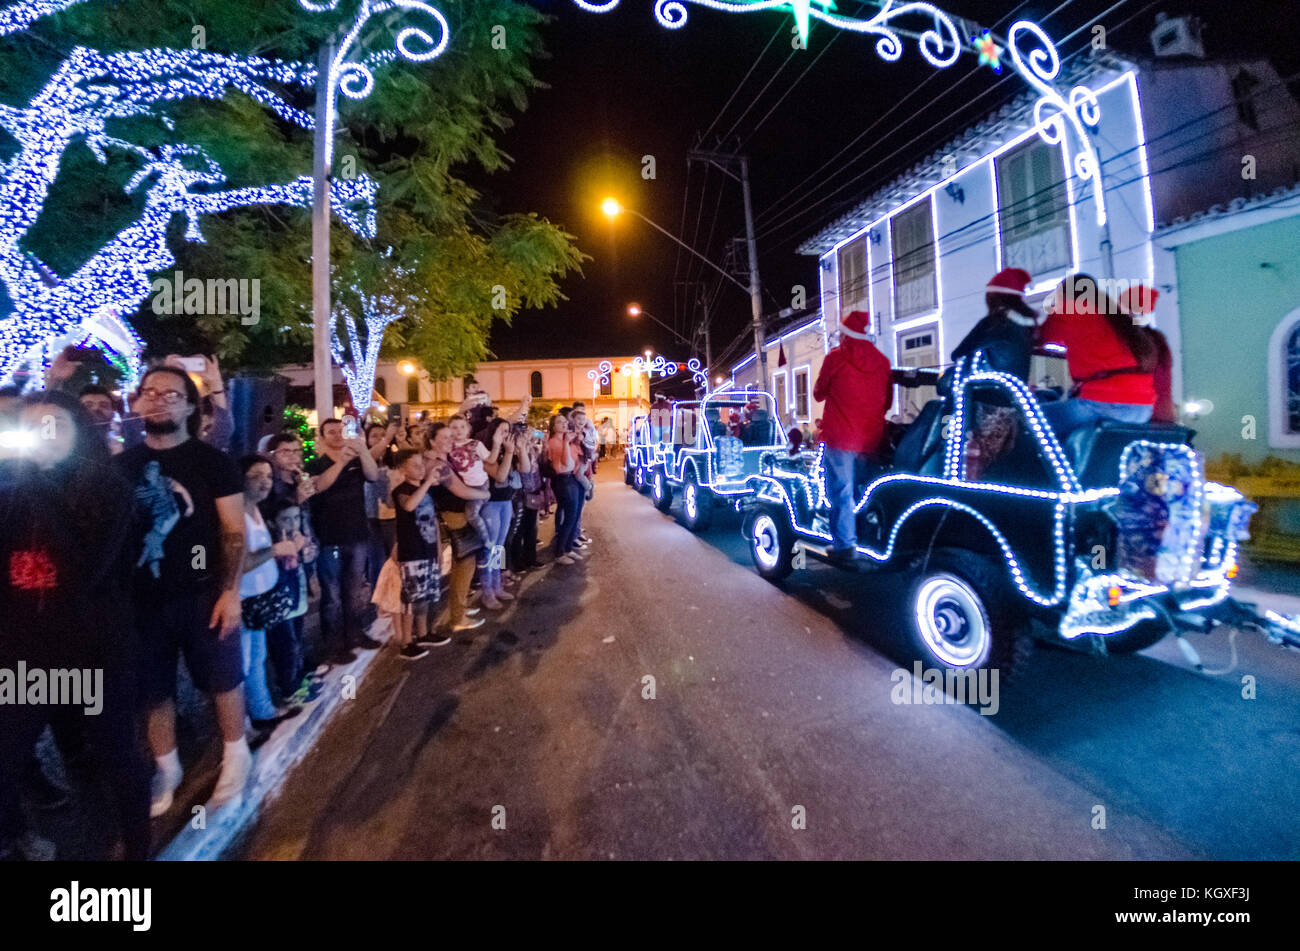 Sao Paulo, Brazil, December 17, 2016: People observe the decoration of Christmas in a public square in the city of Santana de Paranaiba municipality o Stock Photo